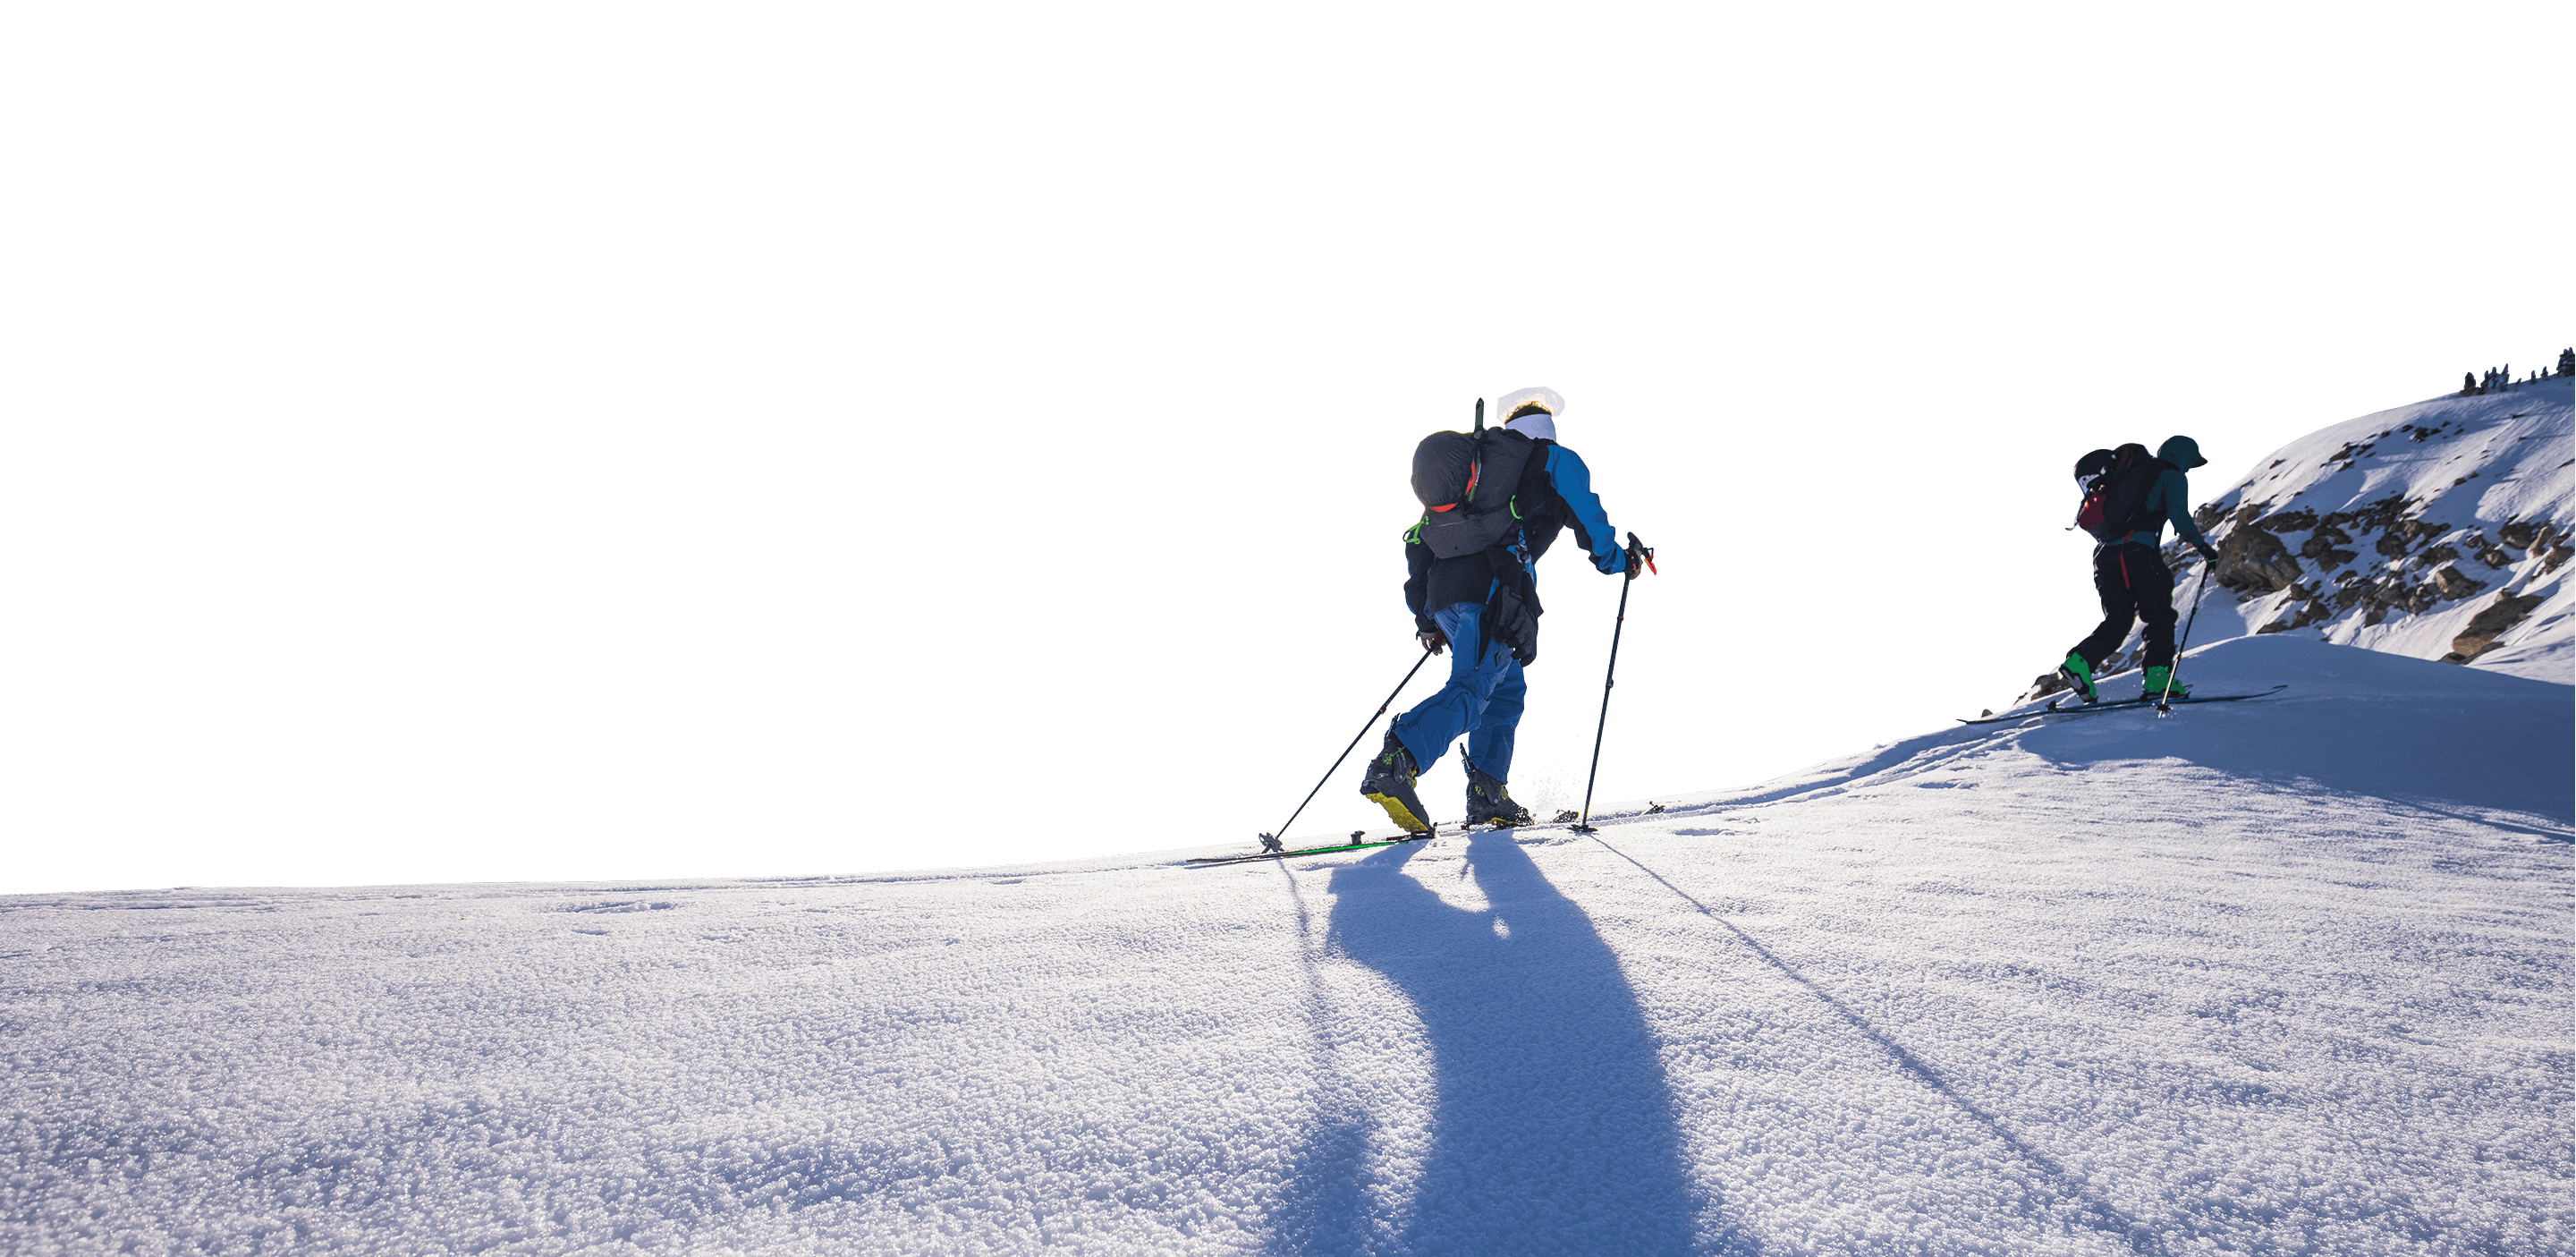 Two skiers skinning up a ridge in the backcountry using Black Diamond equipment.